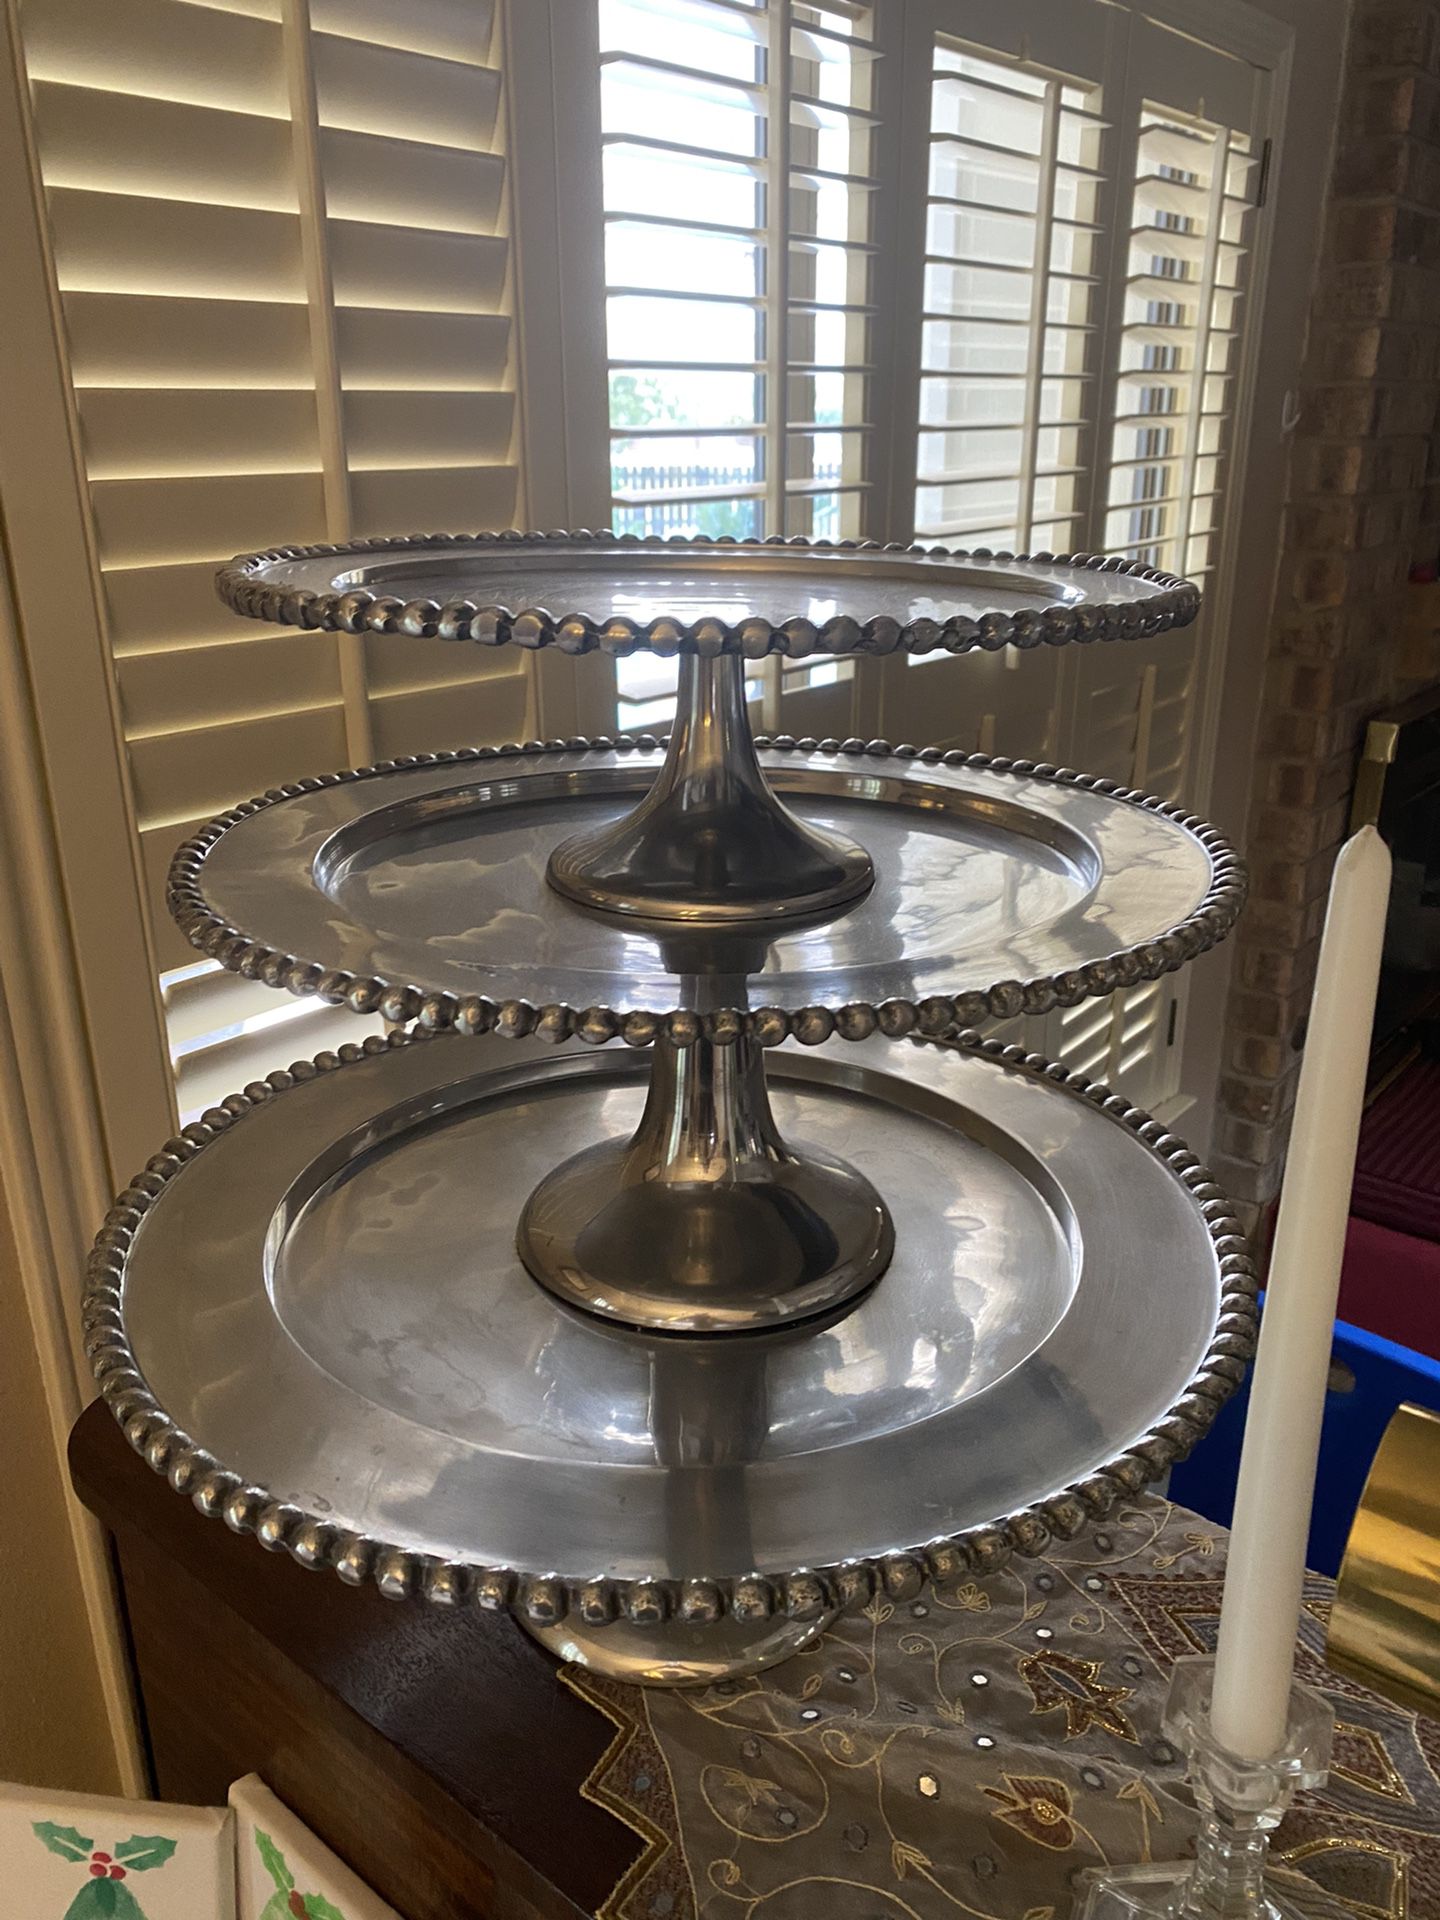 Pewter Cake Stand